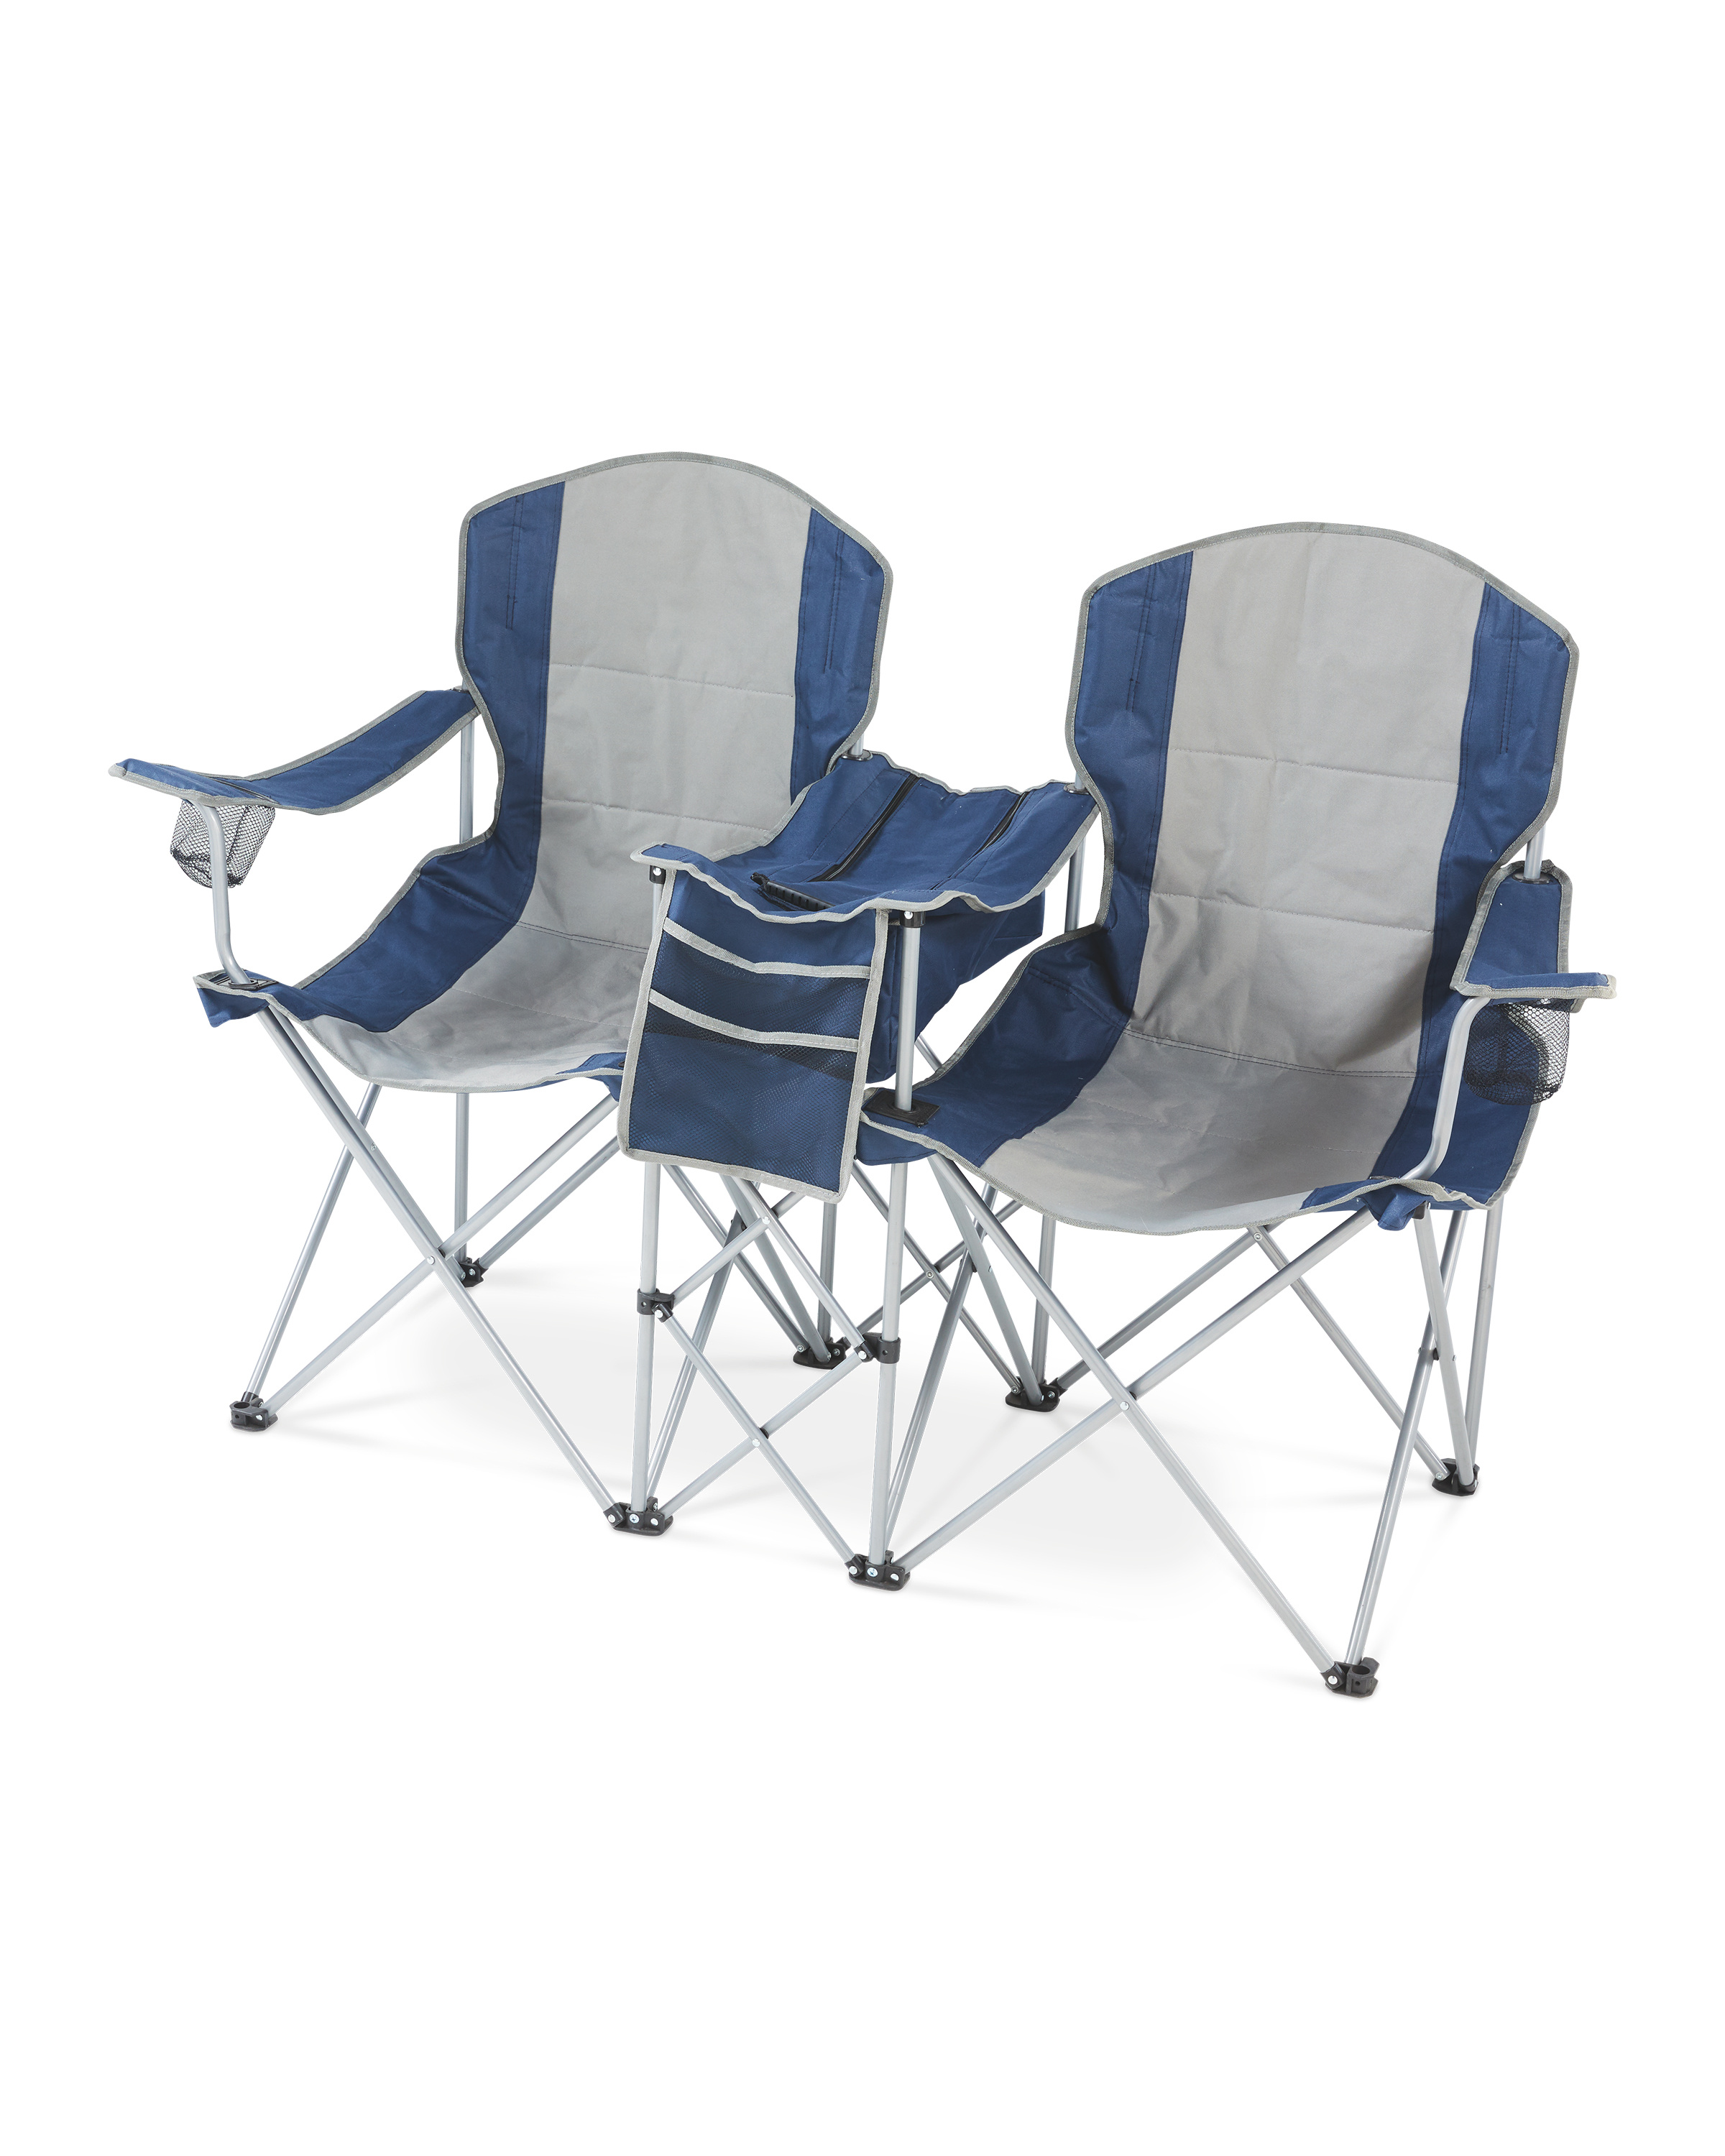 Double Camping Chair With Cooler Aldi Uk, Double Camping Chairs Uk